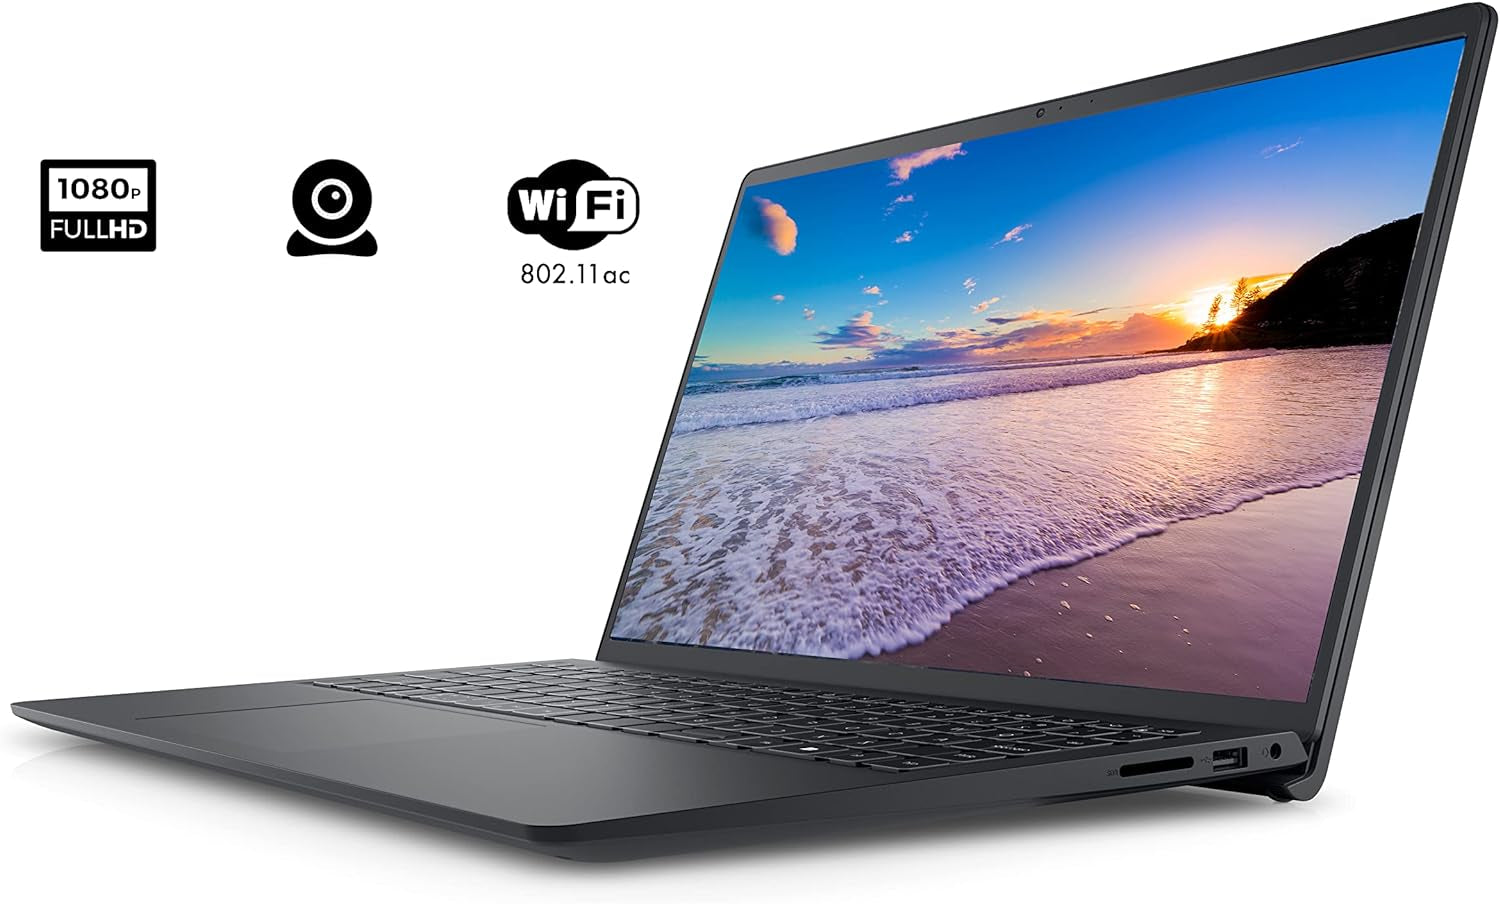 Professional title: Dell Inspiron 15 3511 Laptop with 15.6" FHD Touchscreen, Intel Core i5-1035G1, 12GB RAM, 256GB PCIe NVMe M.2 SSD, SD Card Reader, Webcam, HDMI, WiFi, Windows 11 Home - Black